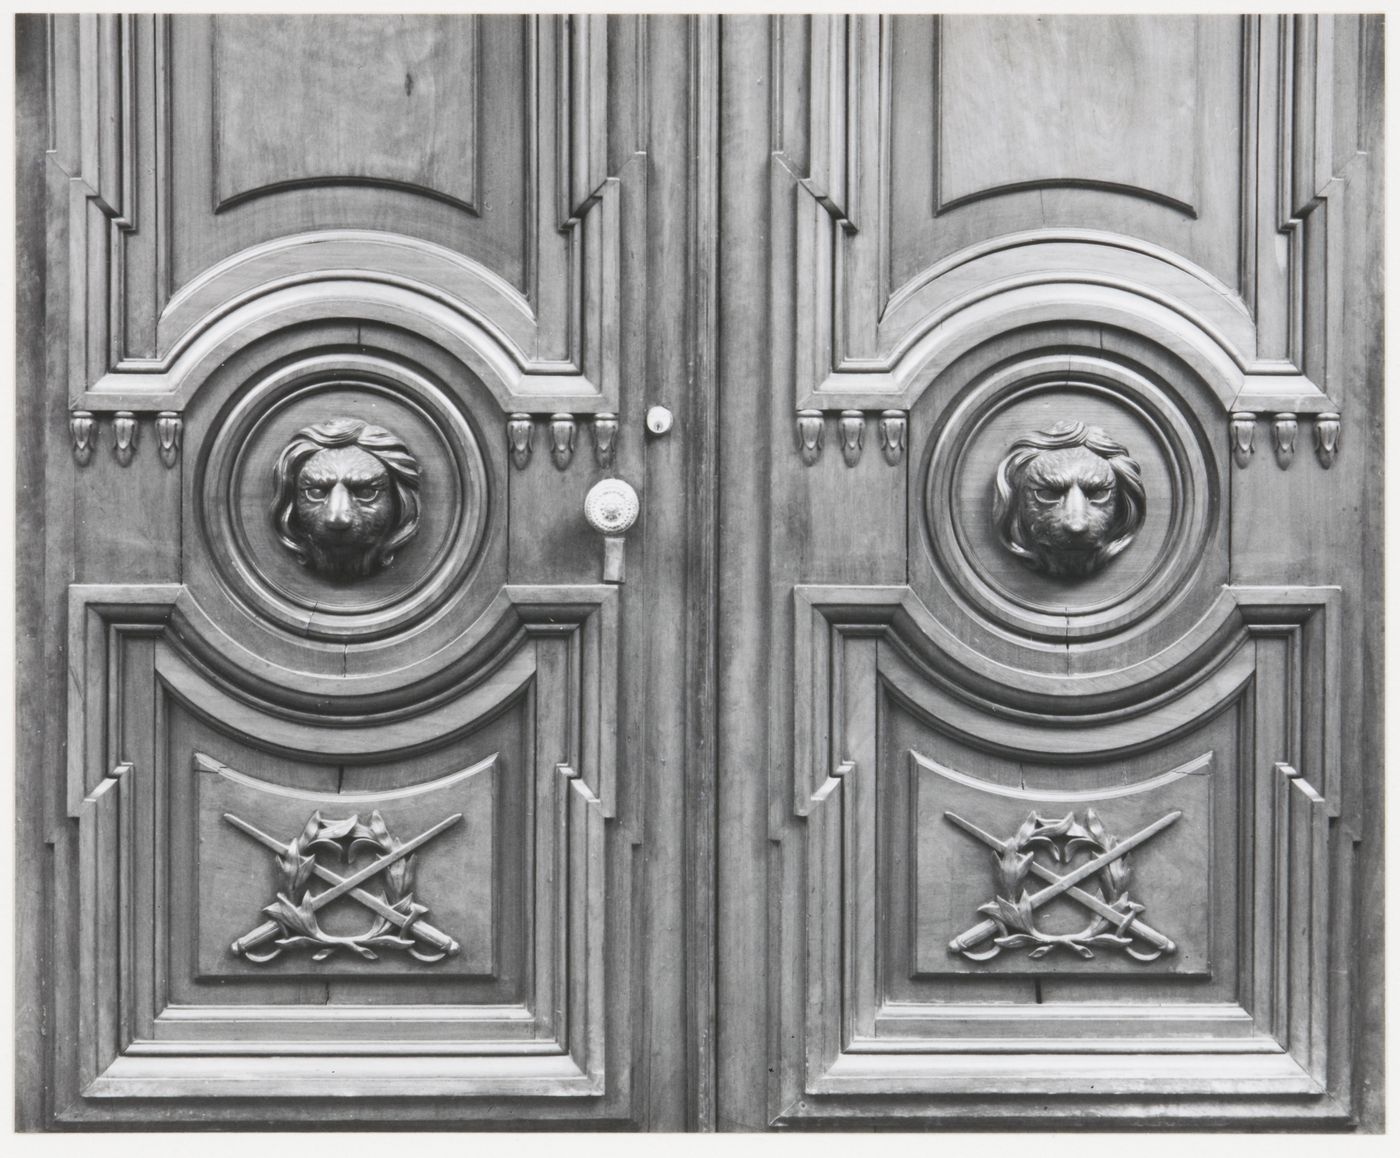 Detail view of doors to mayor's office, Old City Hall, Boston, Massachusetts, United States